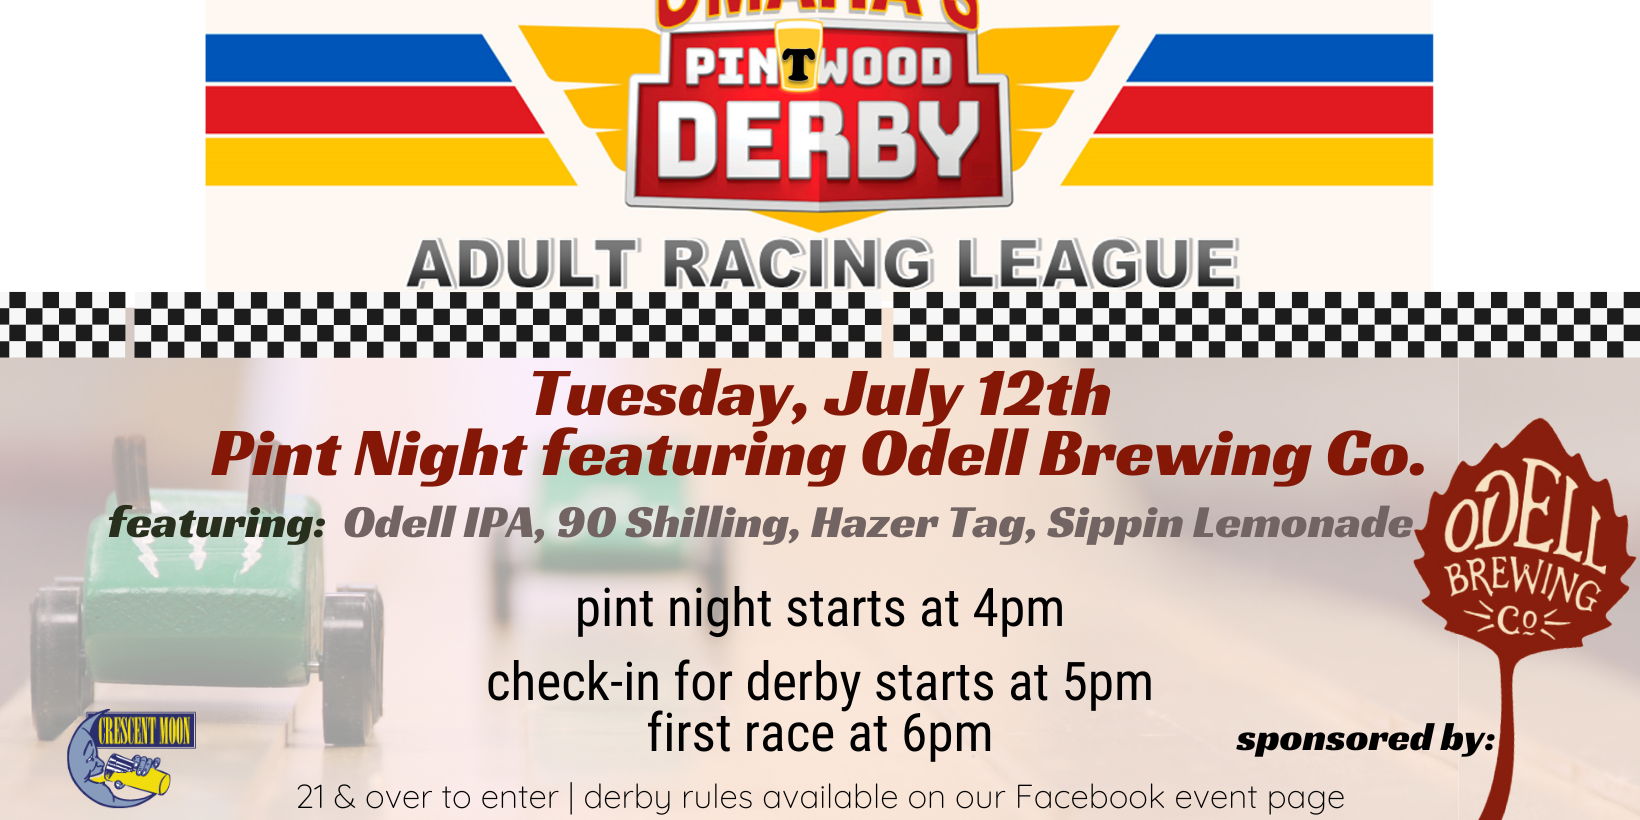 Pint Wood Derby Pint Night with Odell Brewing Co. promotional image